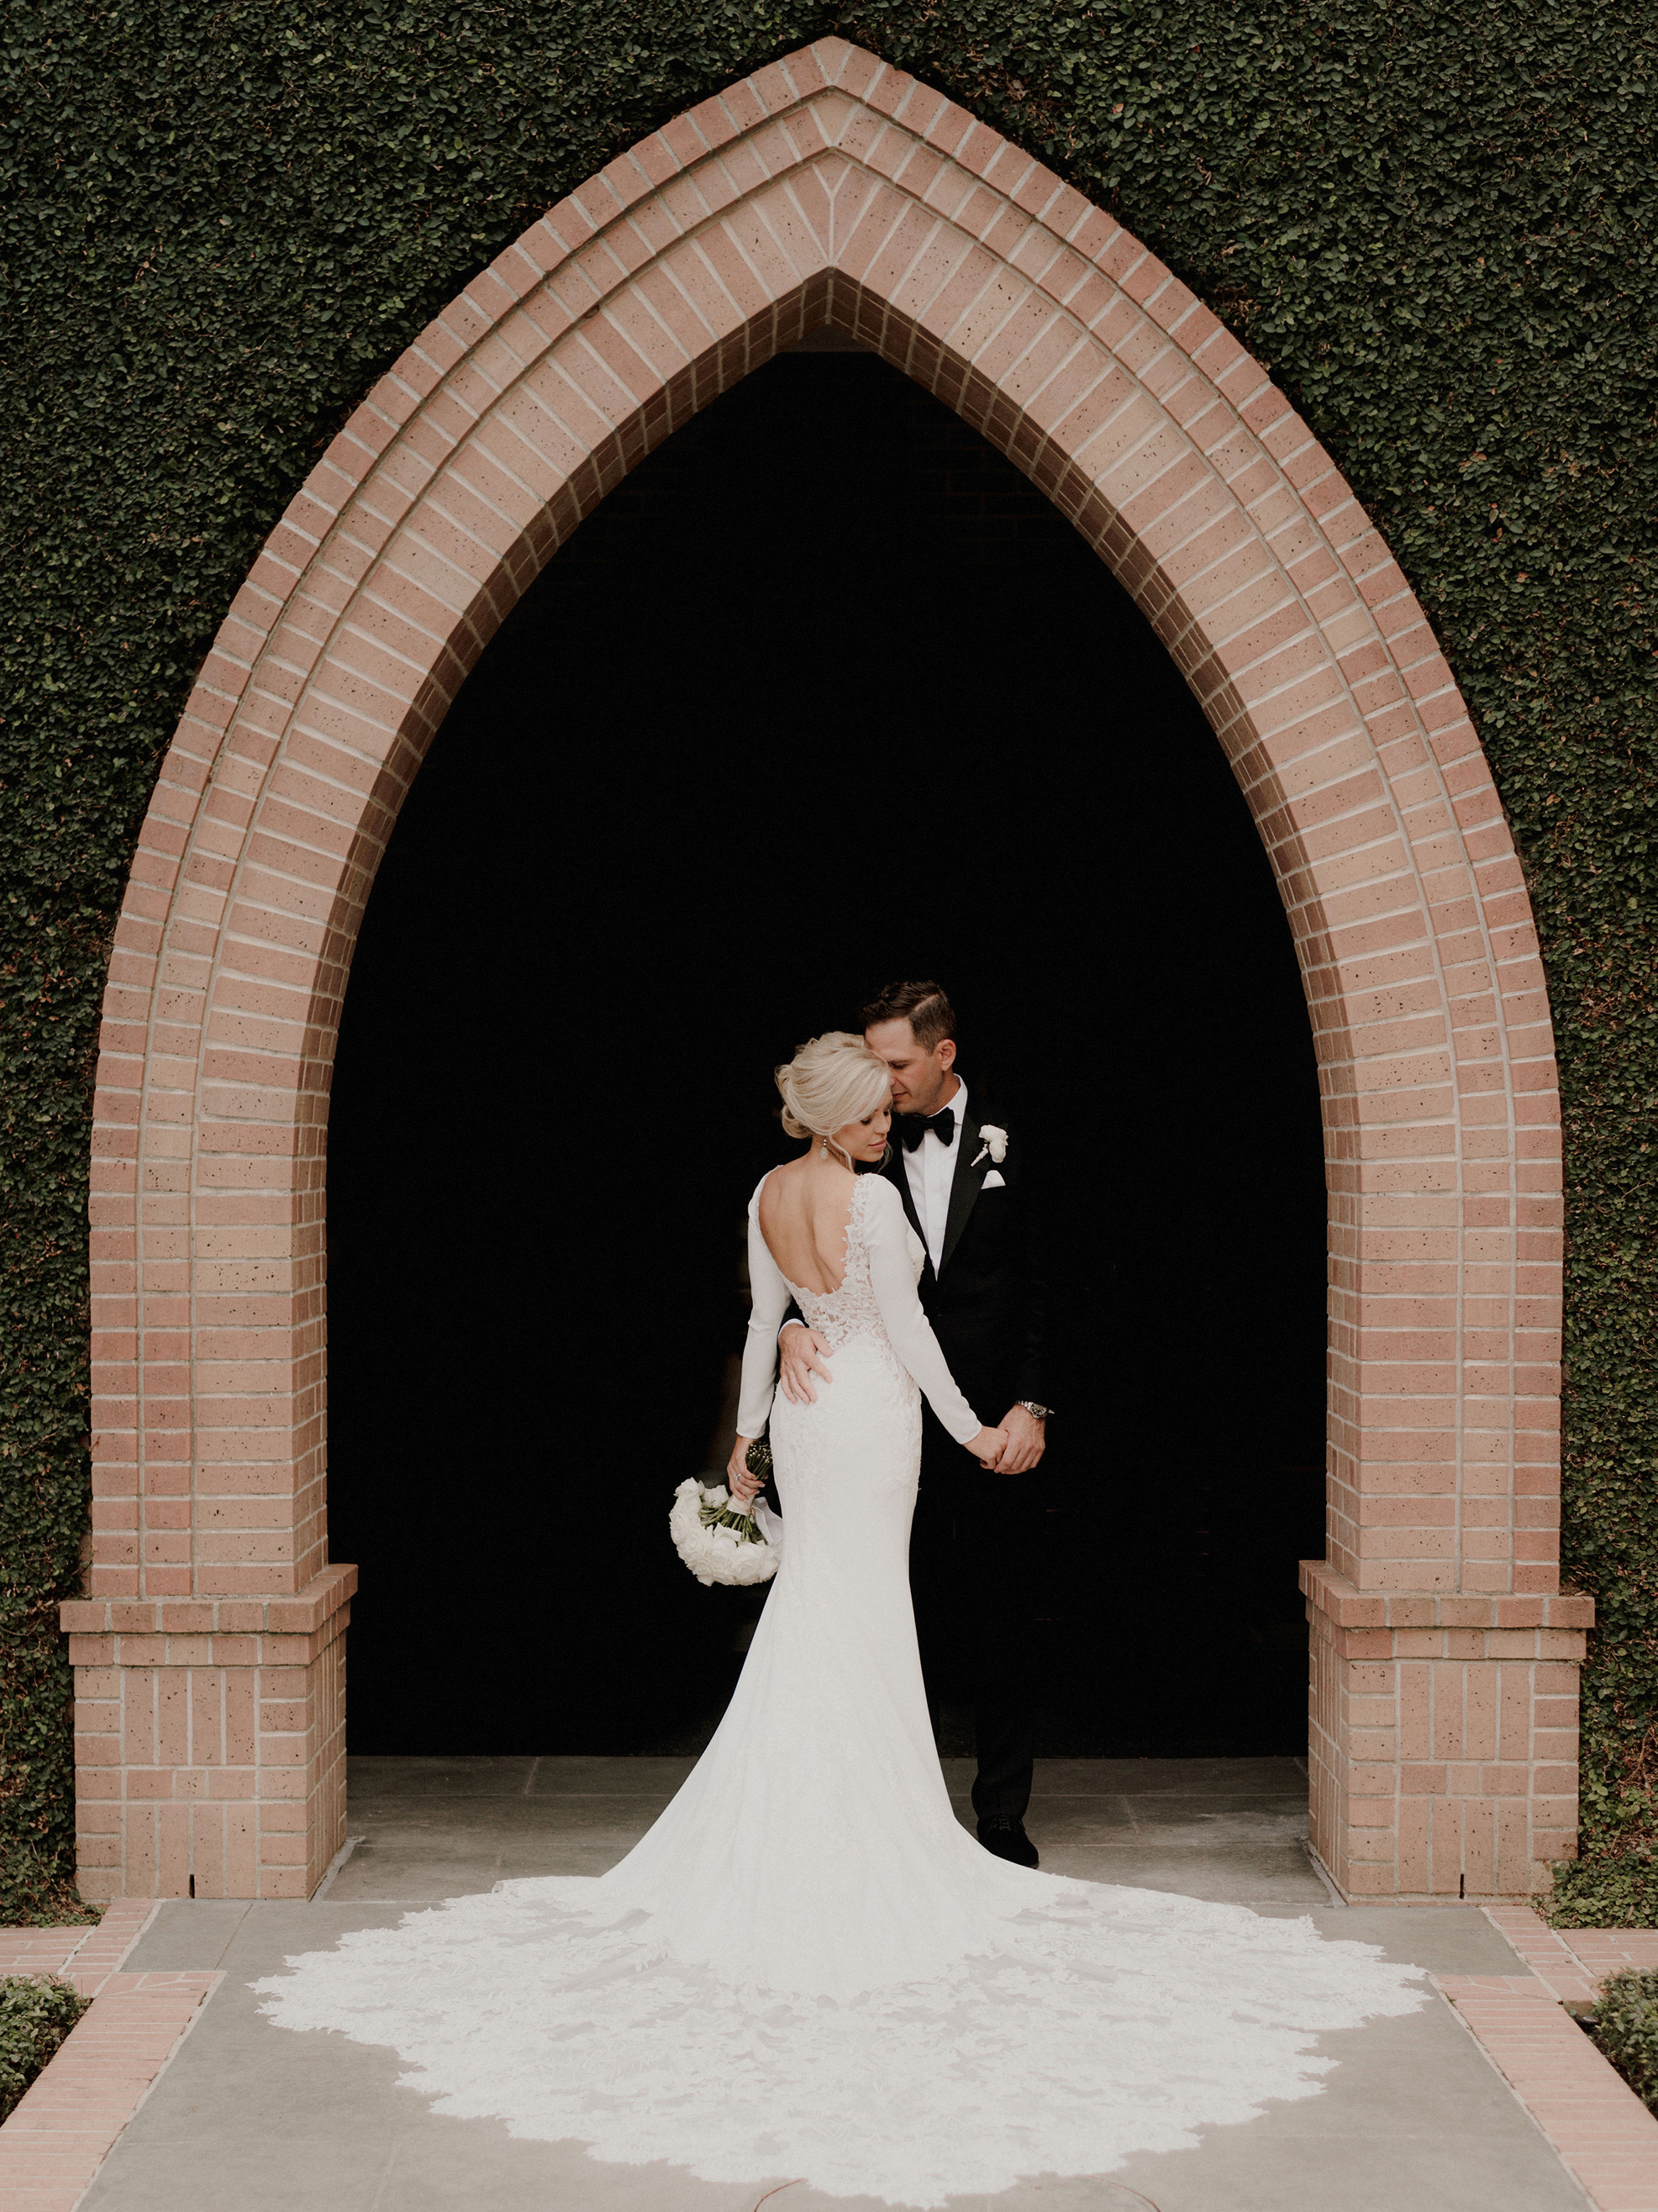 A groom holds a bride underneath a brick arch surrounded by live greenery on their wedding day at St. Marks in Houston, Texas.